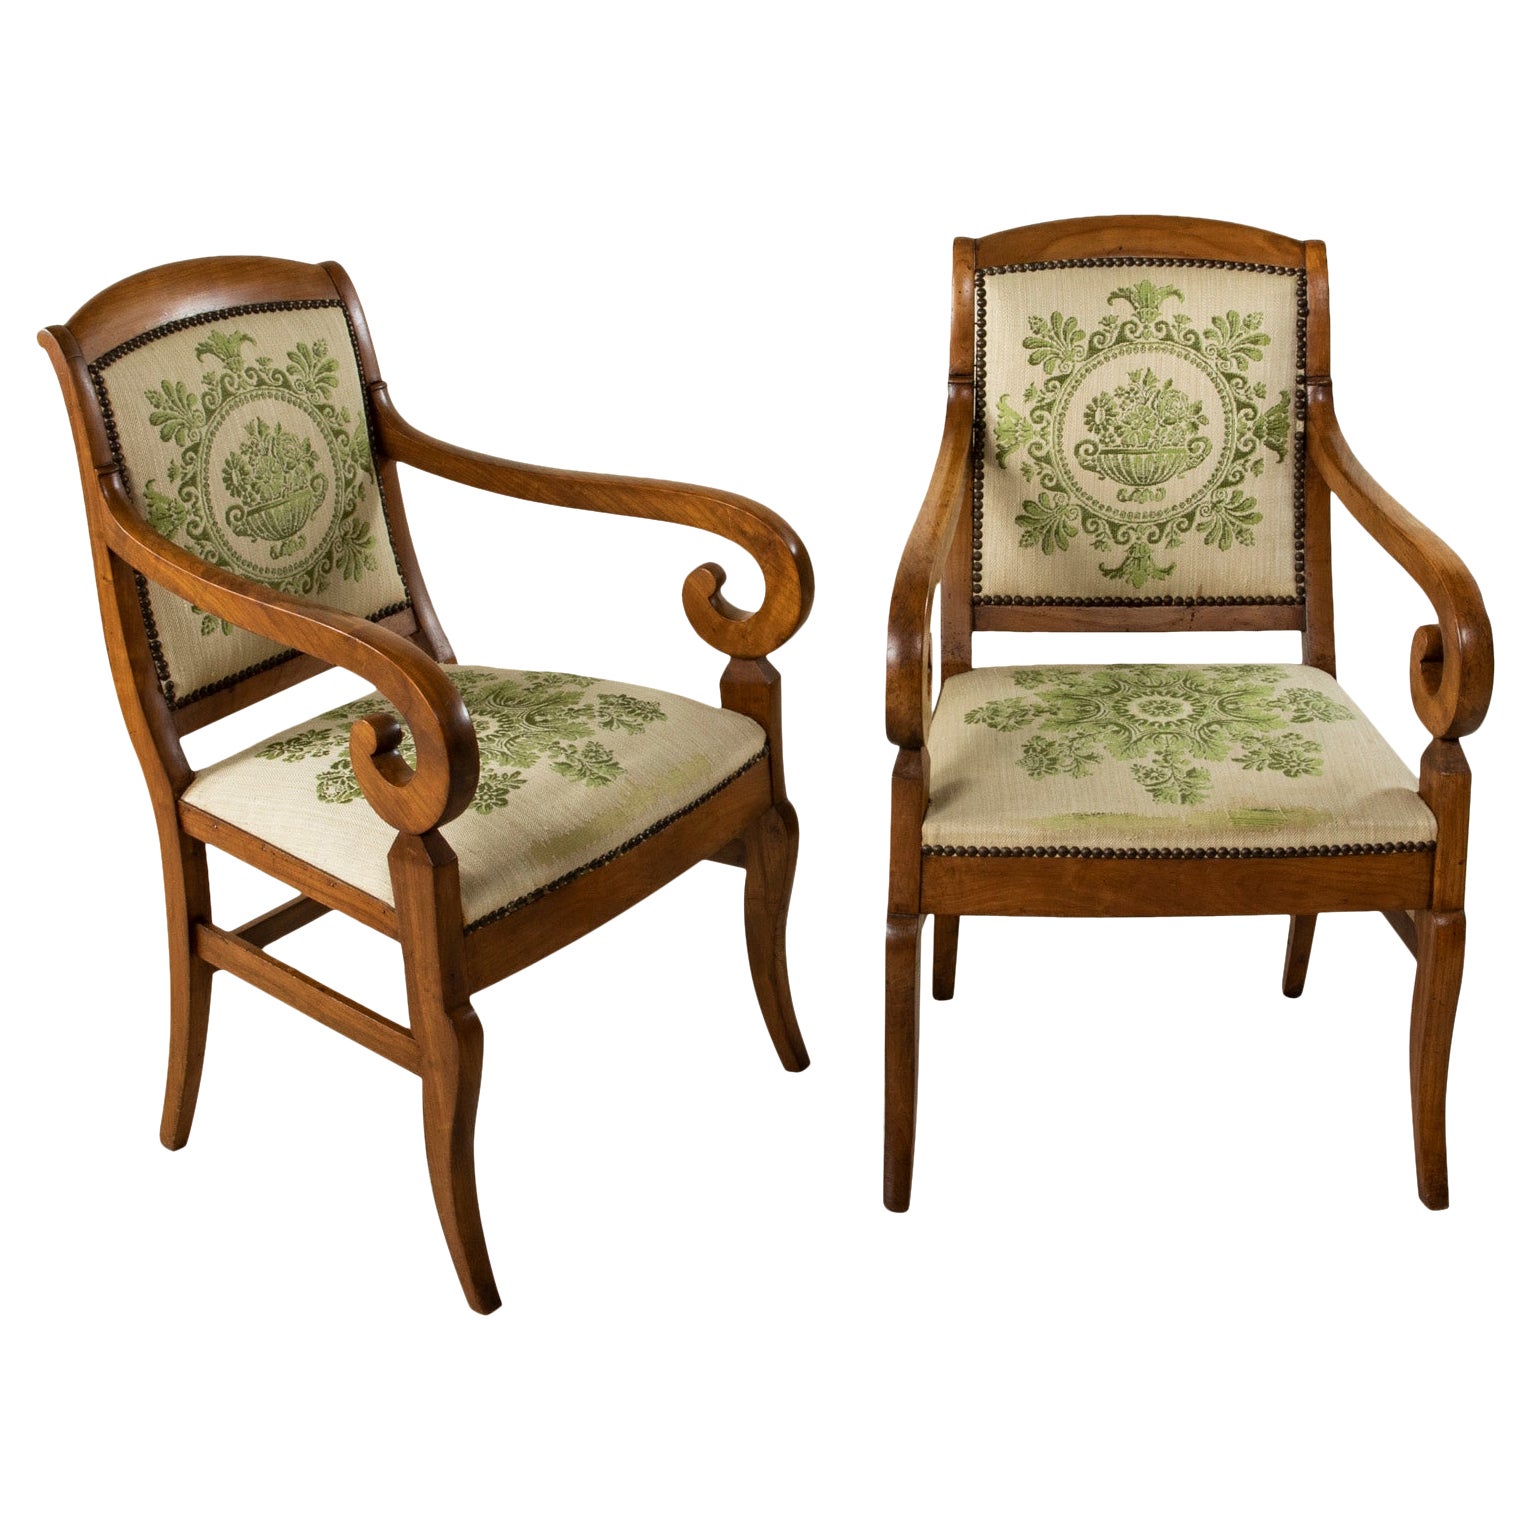 Early 19th Century French Restauration Period Elm Armchairs with Urn Motif